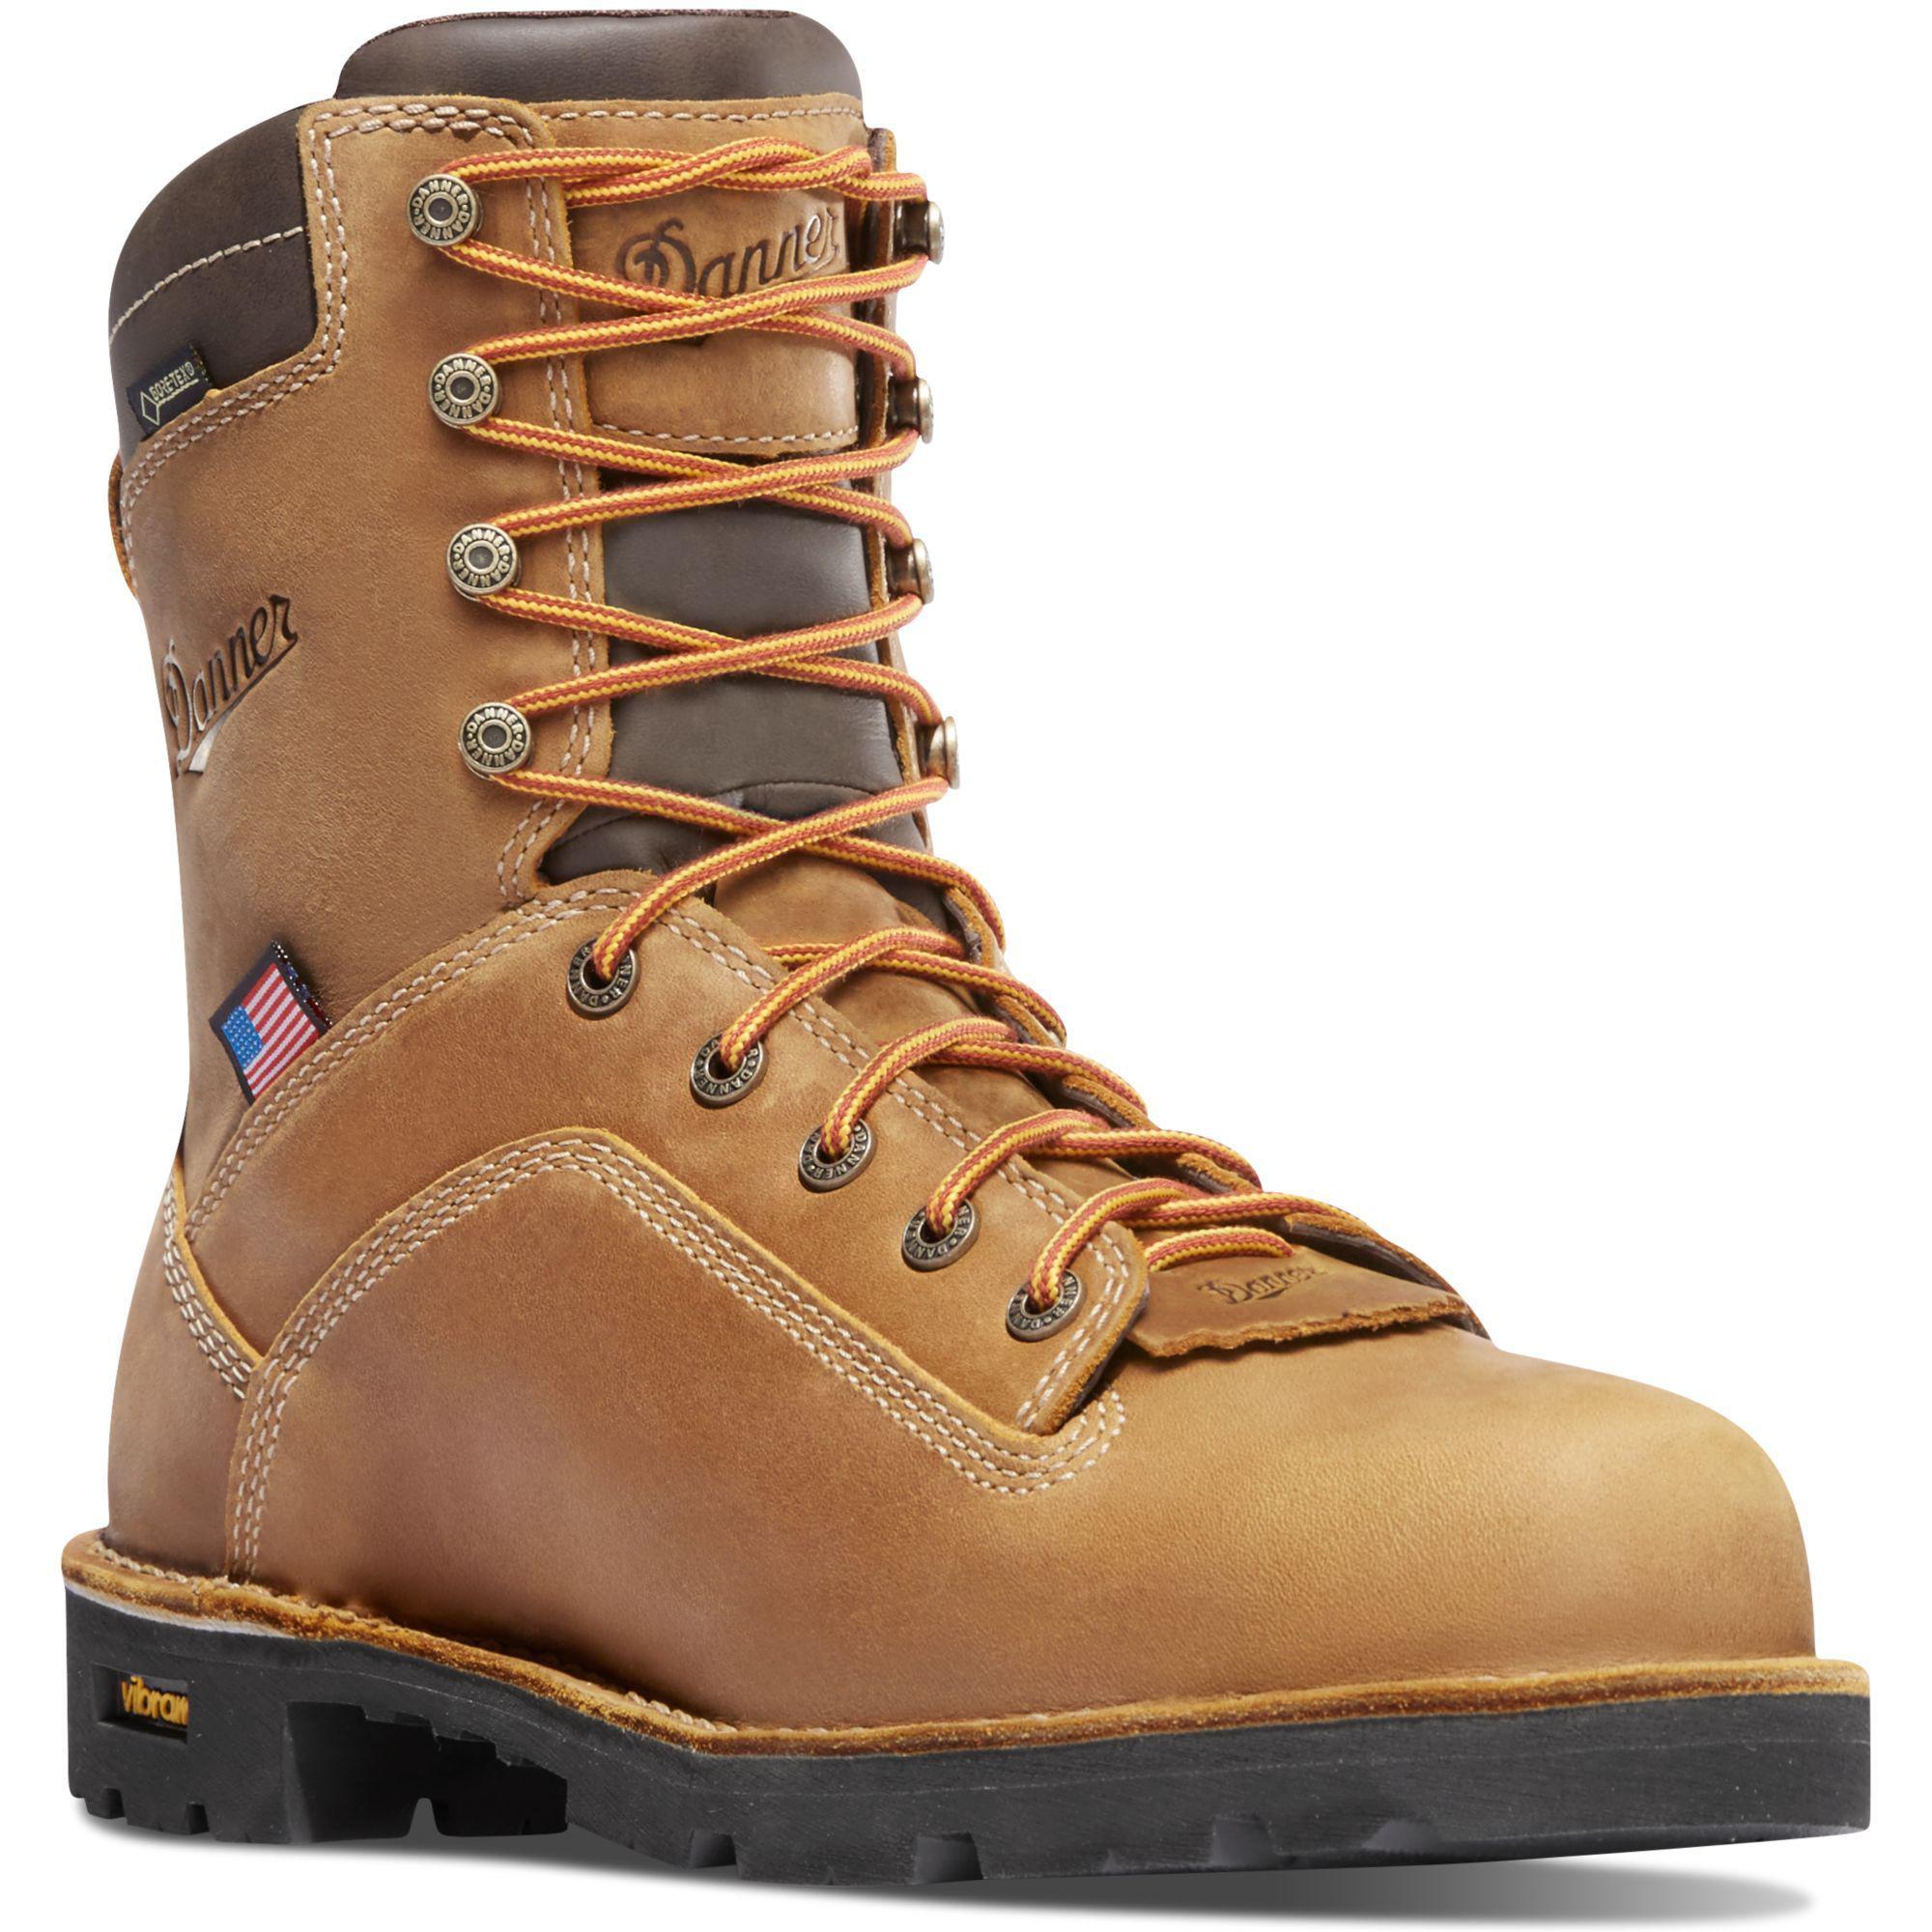 Danner Men's Quarry USA Made 8" Comp Toe Ins WP Work Boot Brown 17321 7 / Medium / Brown - Overlook Boots